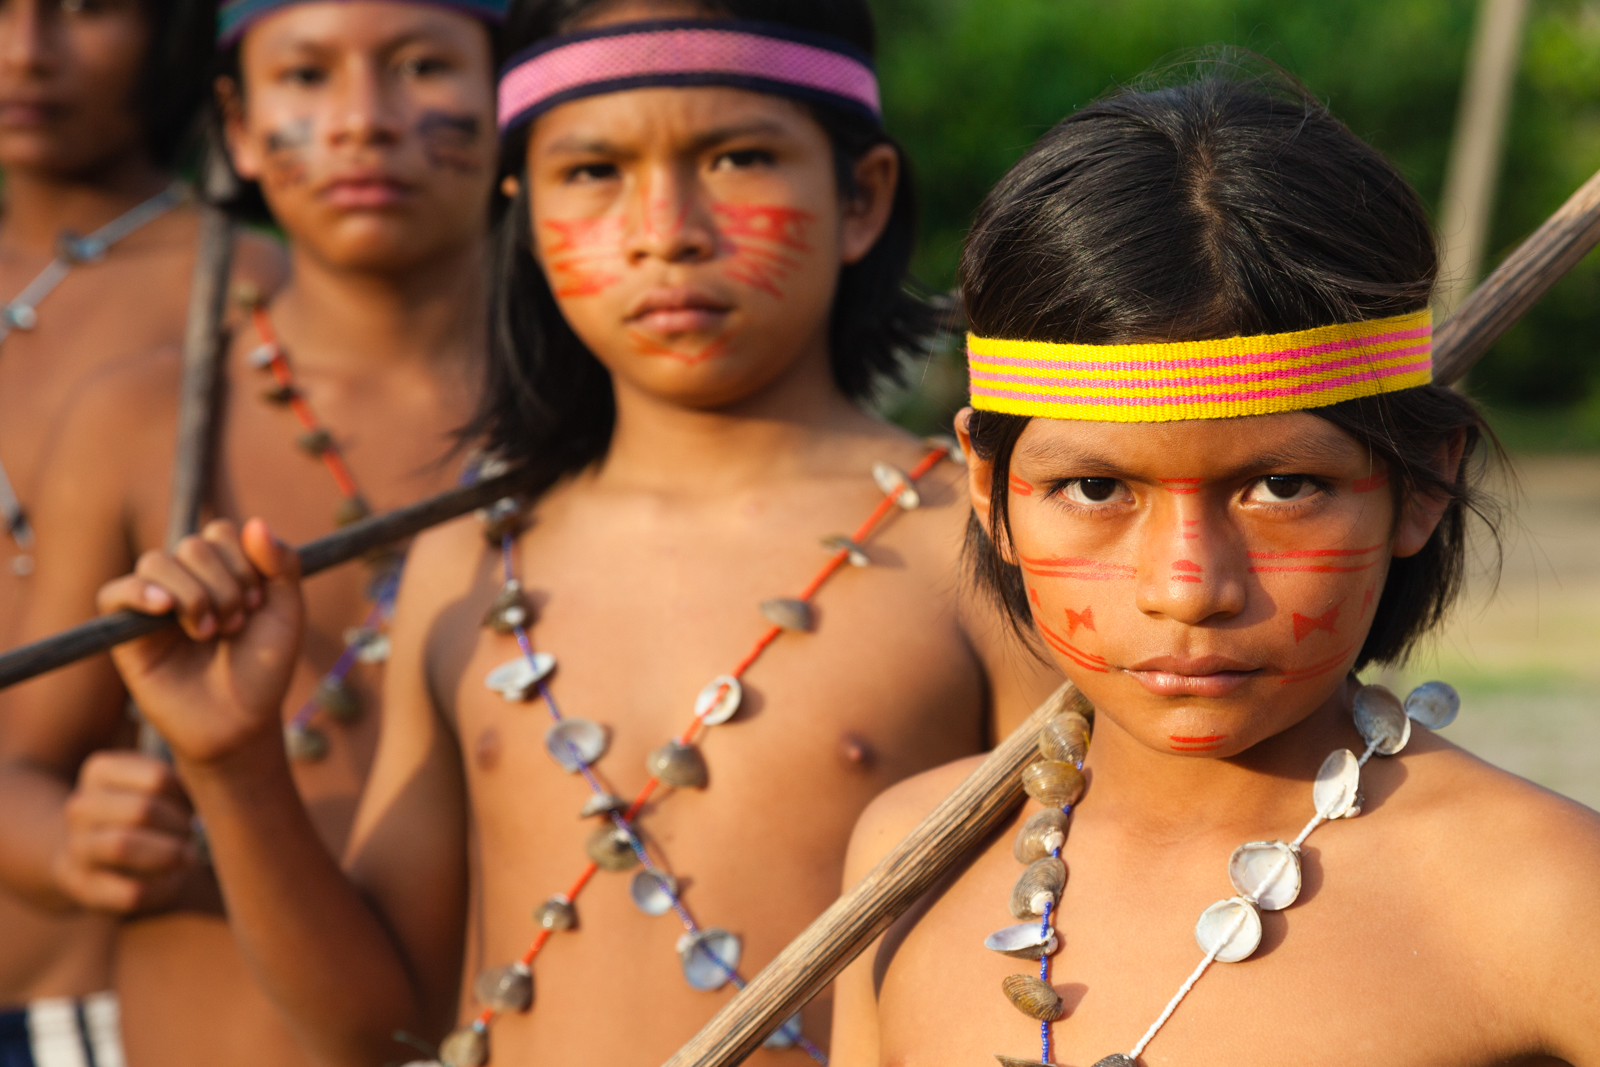 indigenous people - Article Blog - Andy Isaacson.